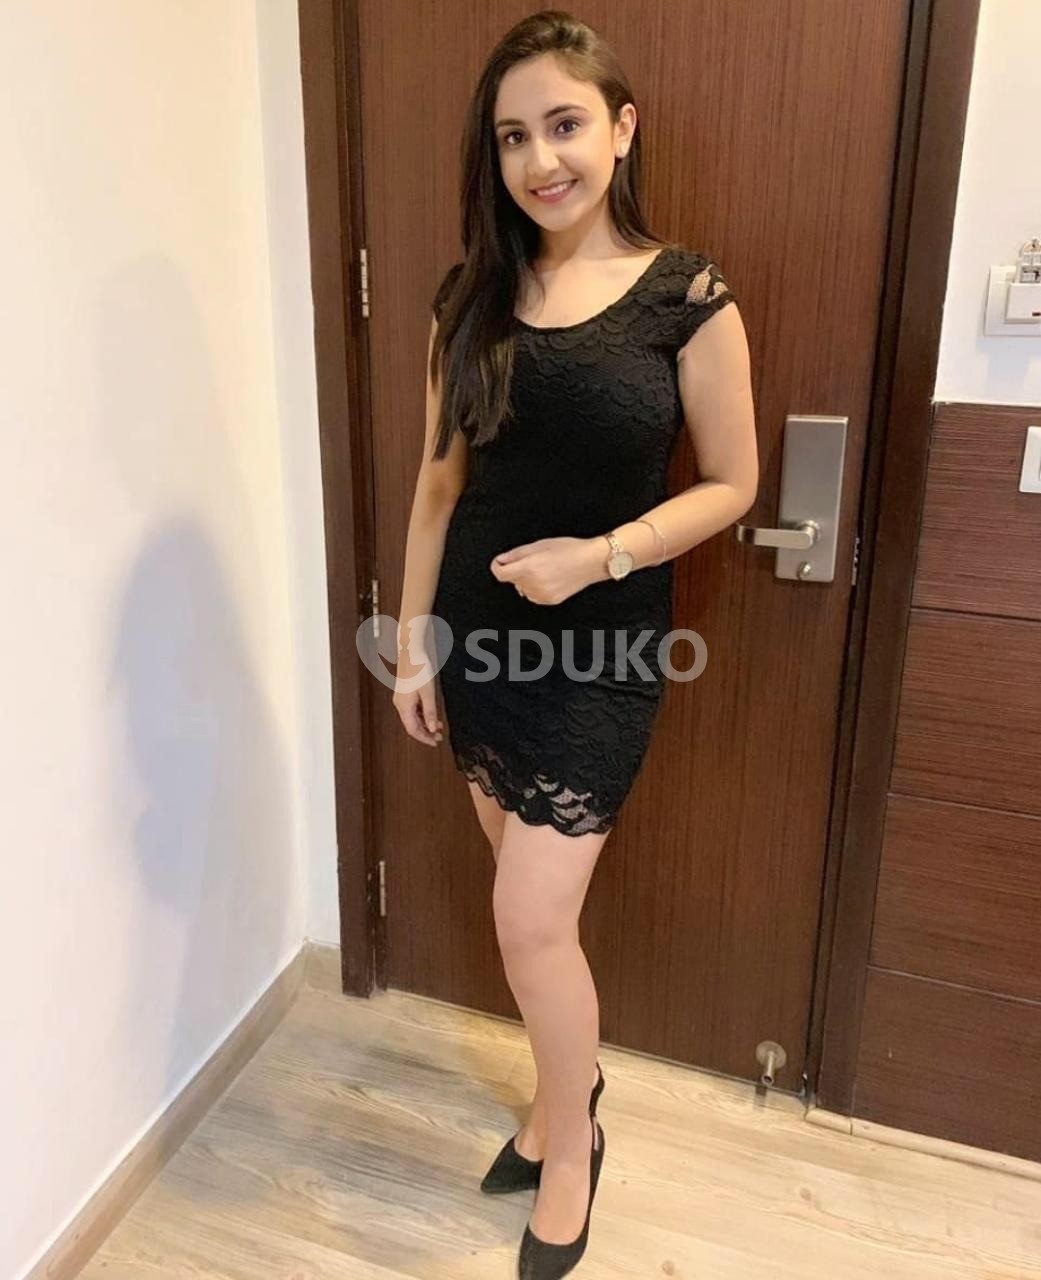 Panchkula 💥💥🥰LOW PRICE INDEPENDENT DAY-NIGHT VIP HOTTEST MODELS COLLEGE GIRLS AVAILABLE 💯 SAFE SECURE FULL S